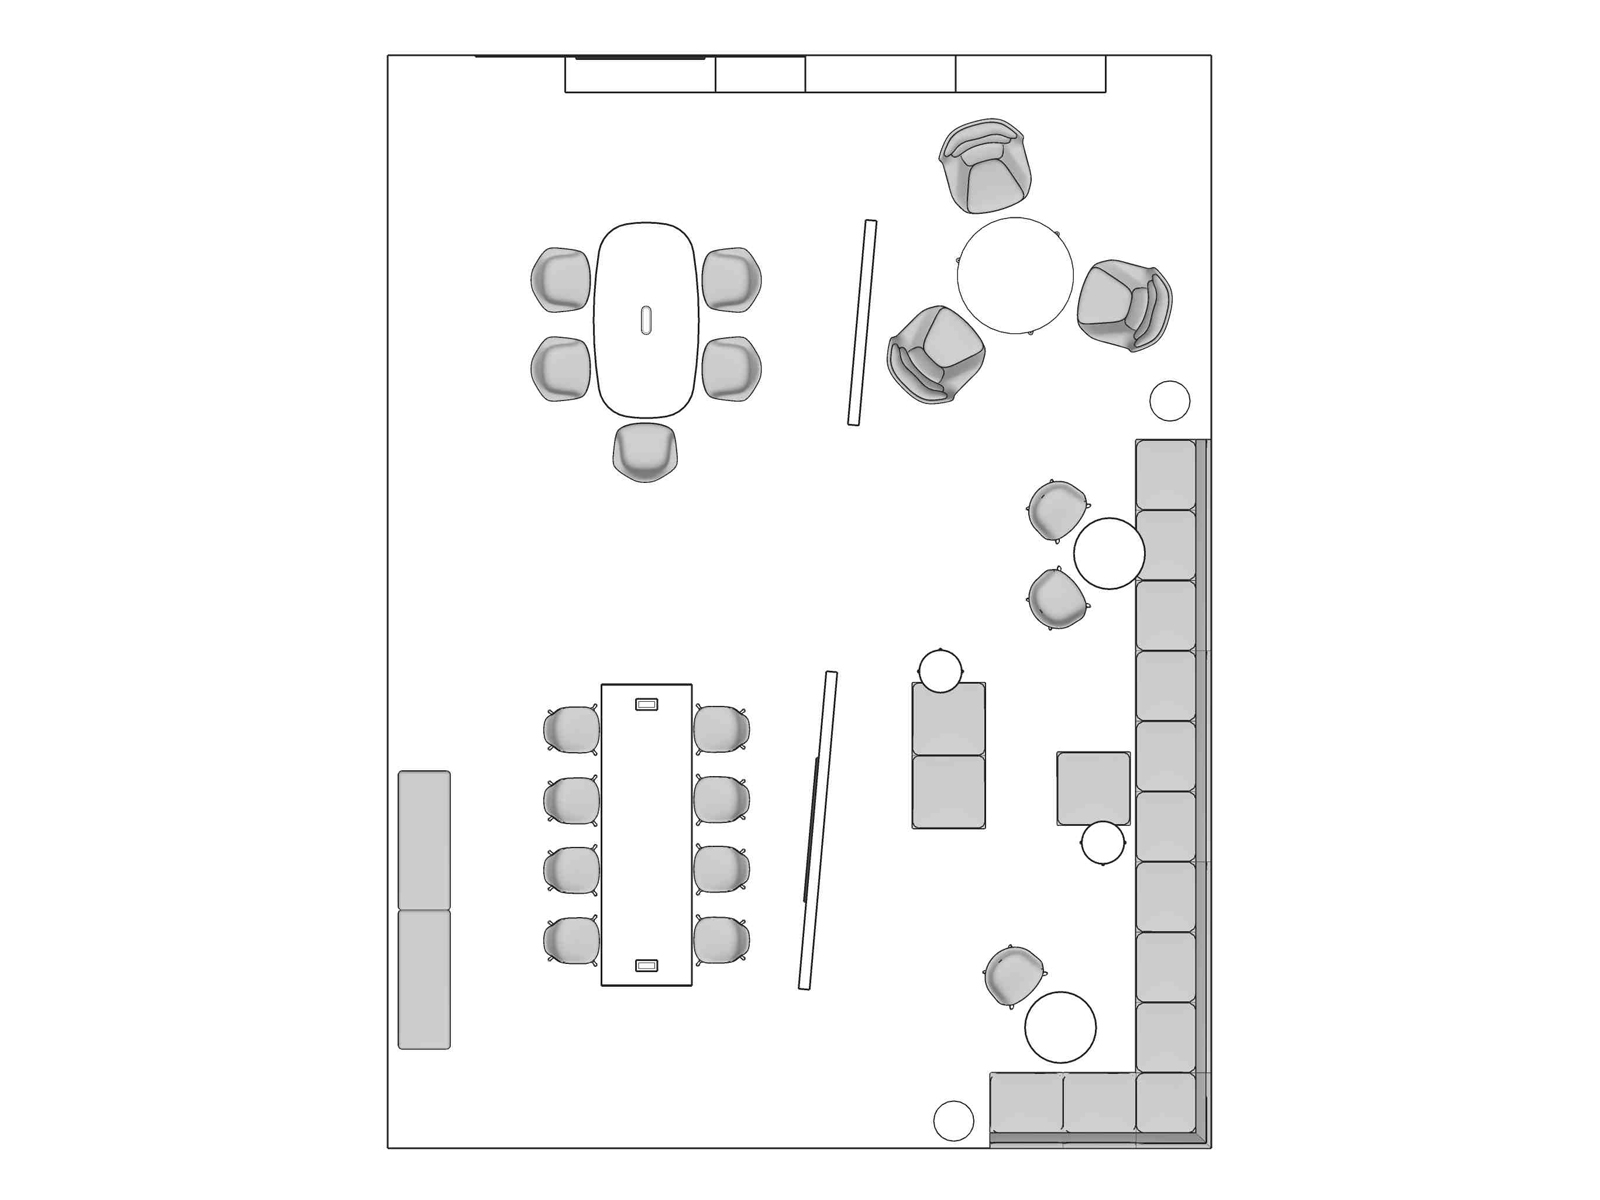 A line drawing viewed from above - Faculty Admin 003